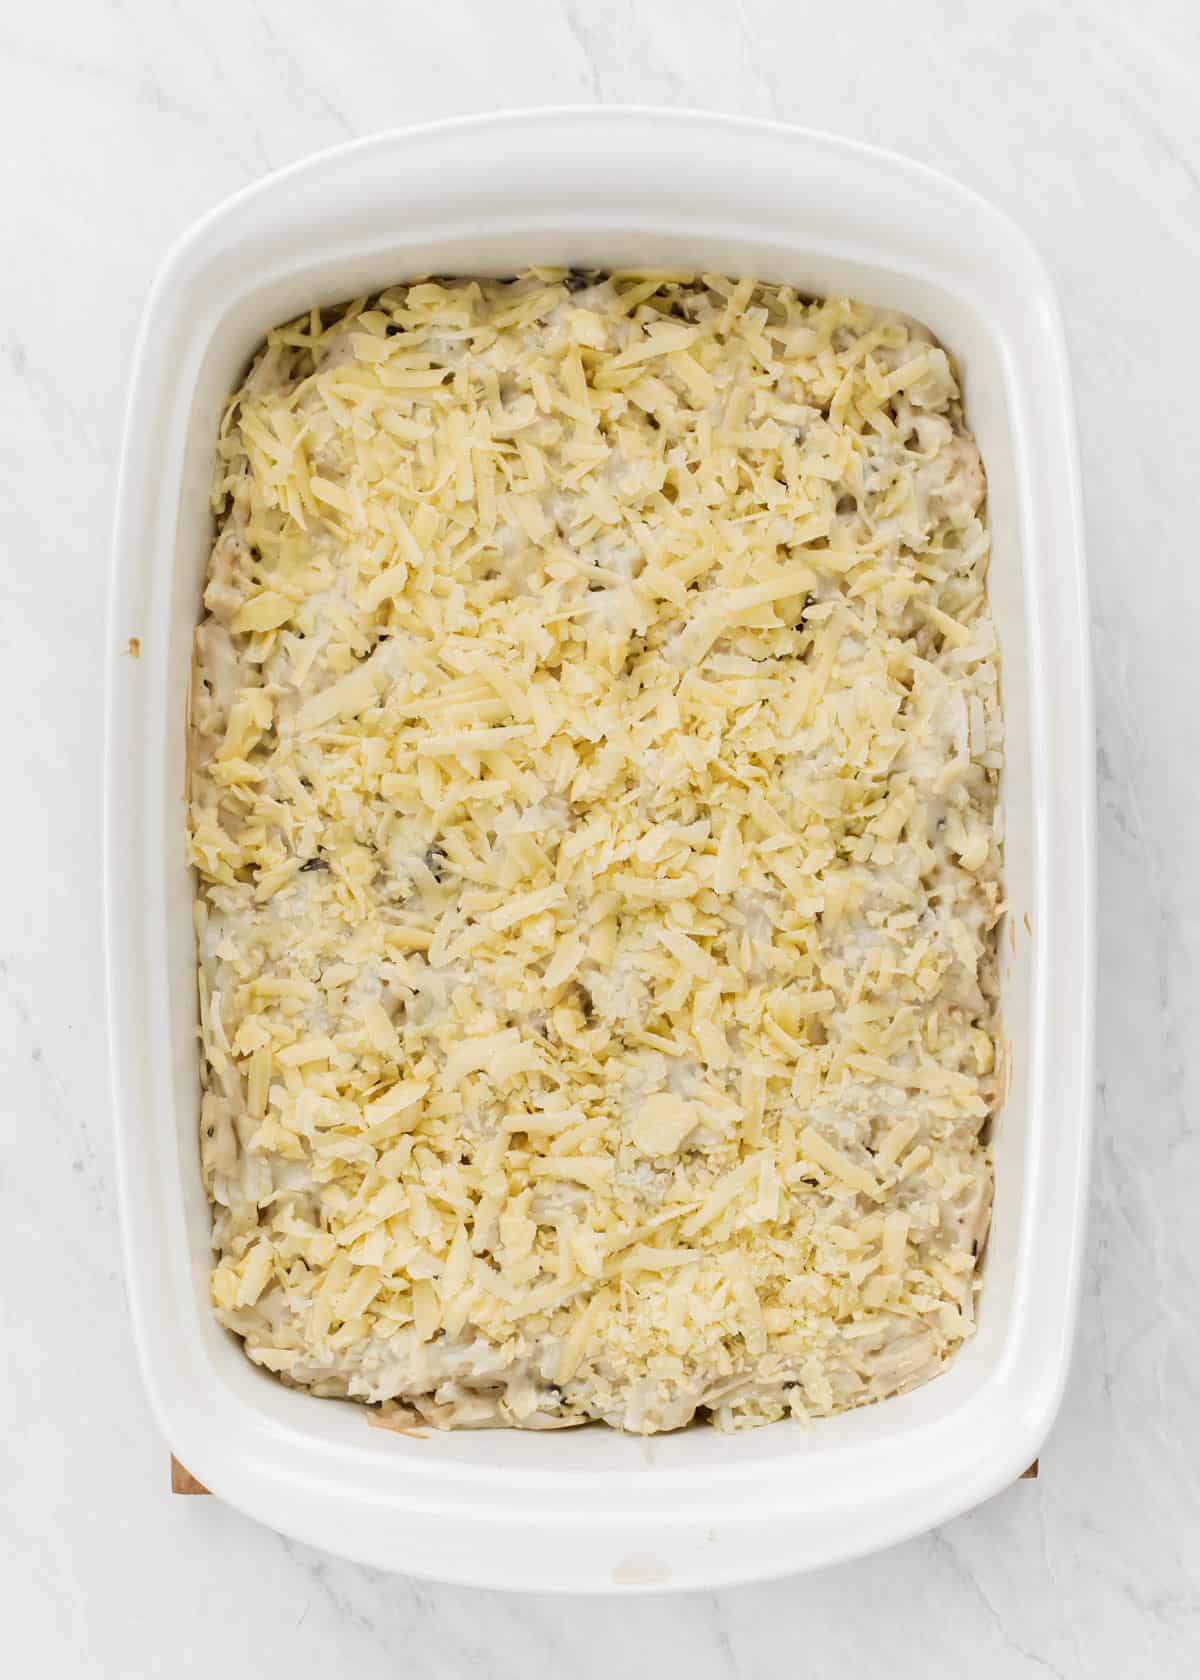 potato casserole with shredded cheese on top ready to bake.